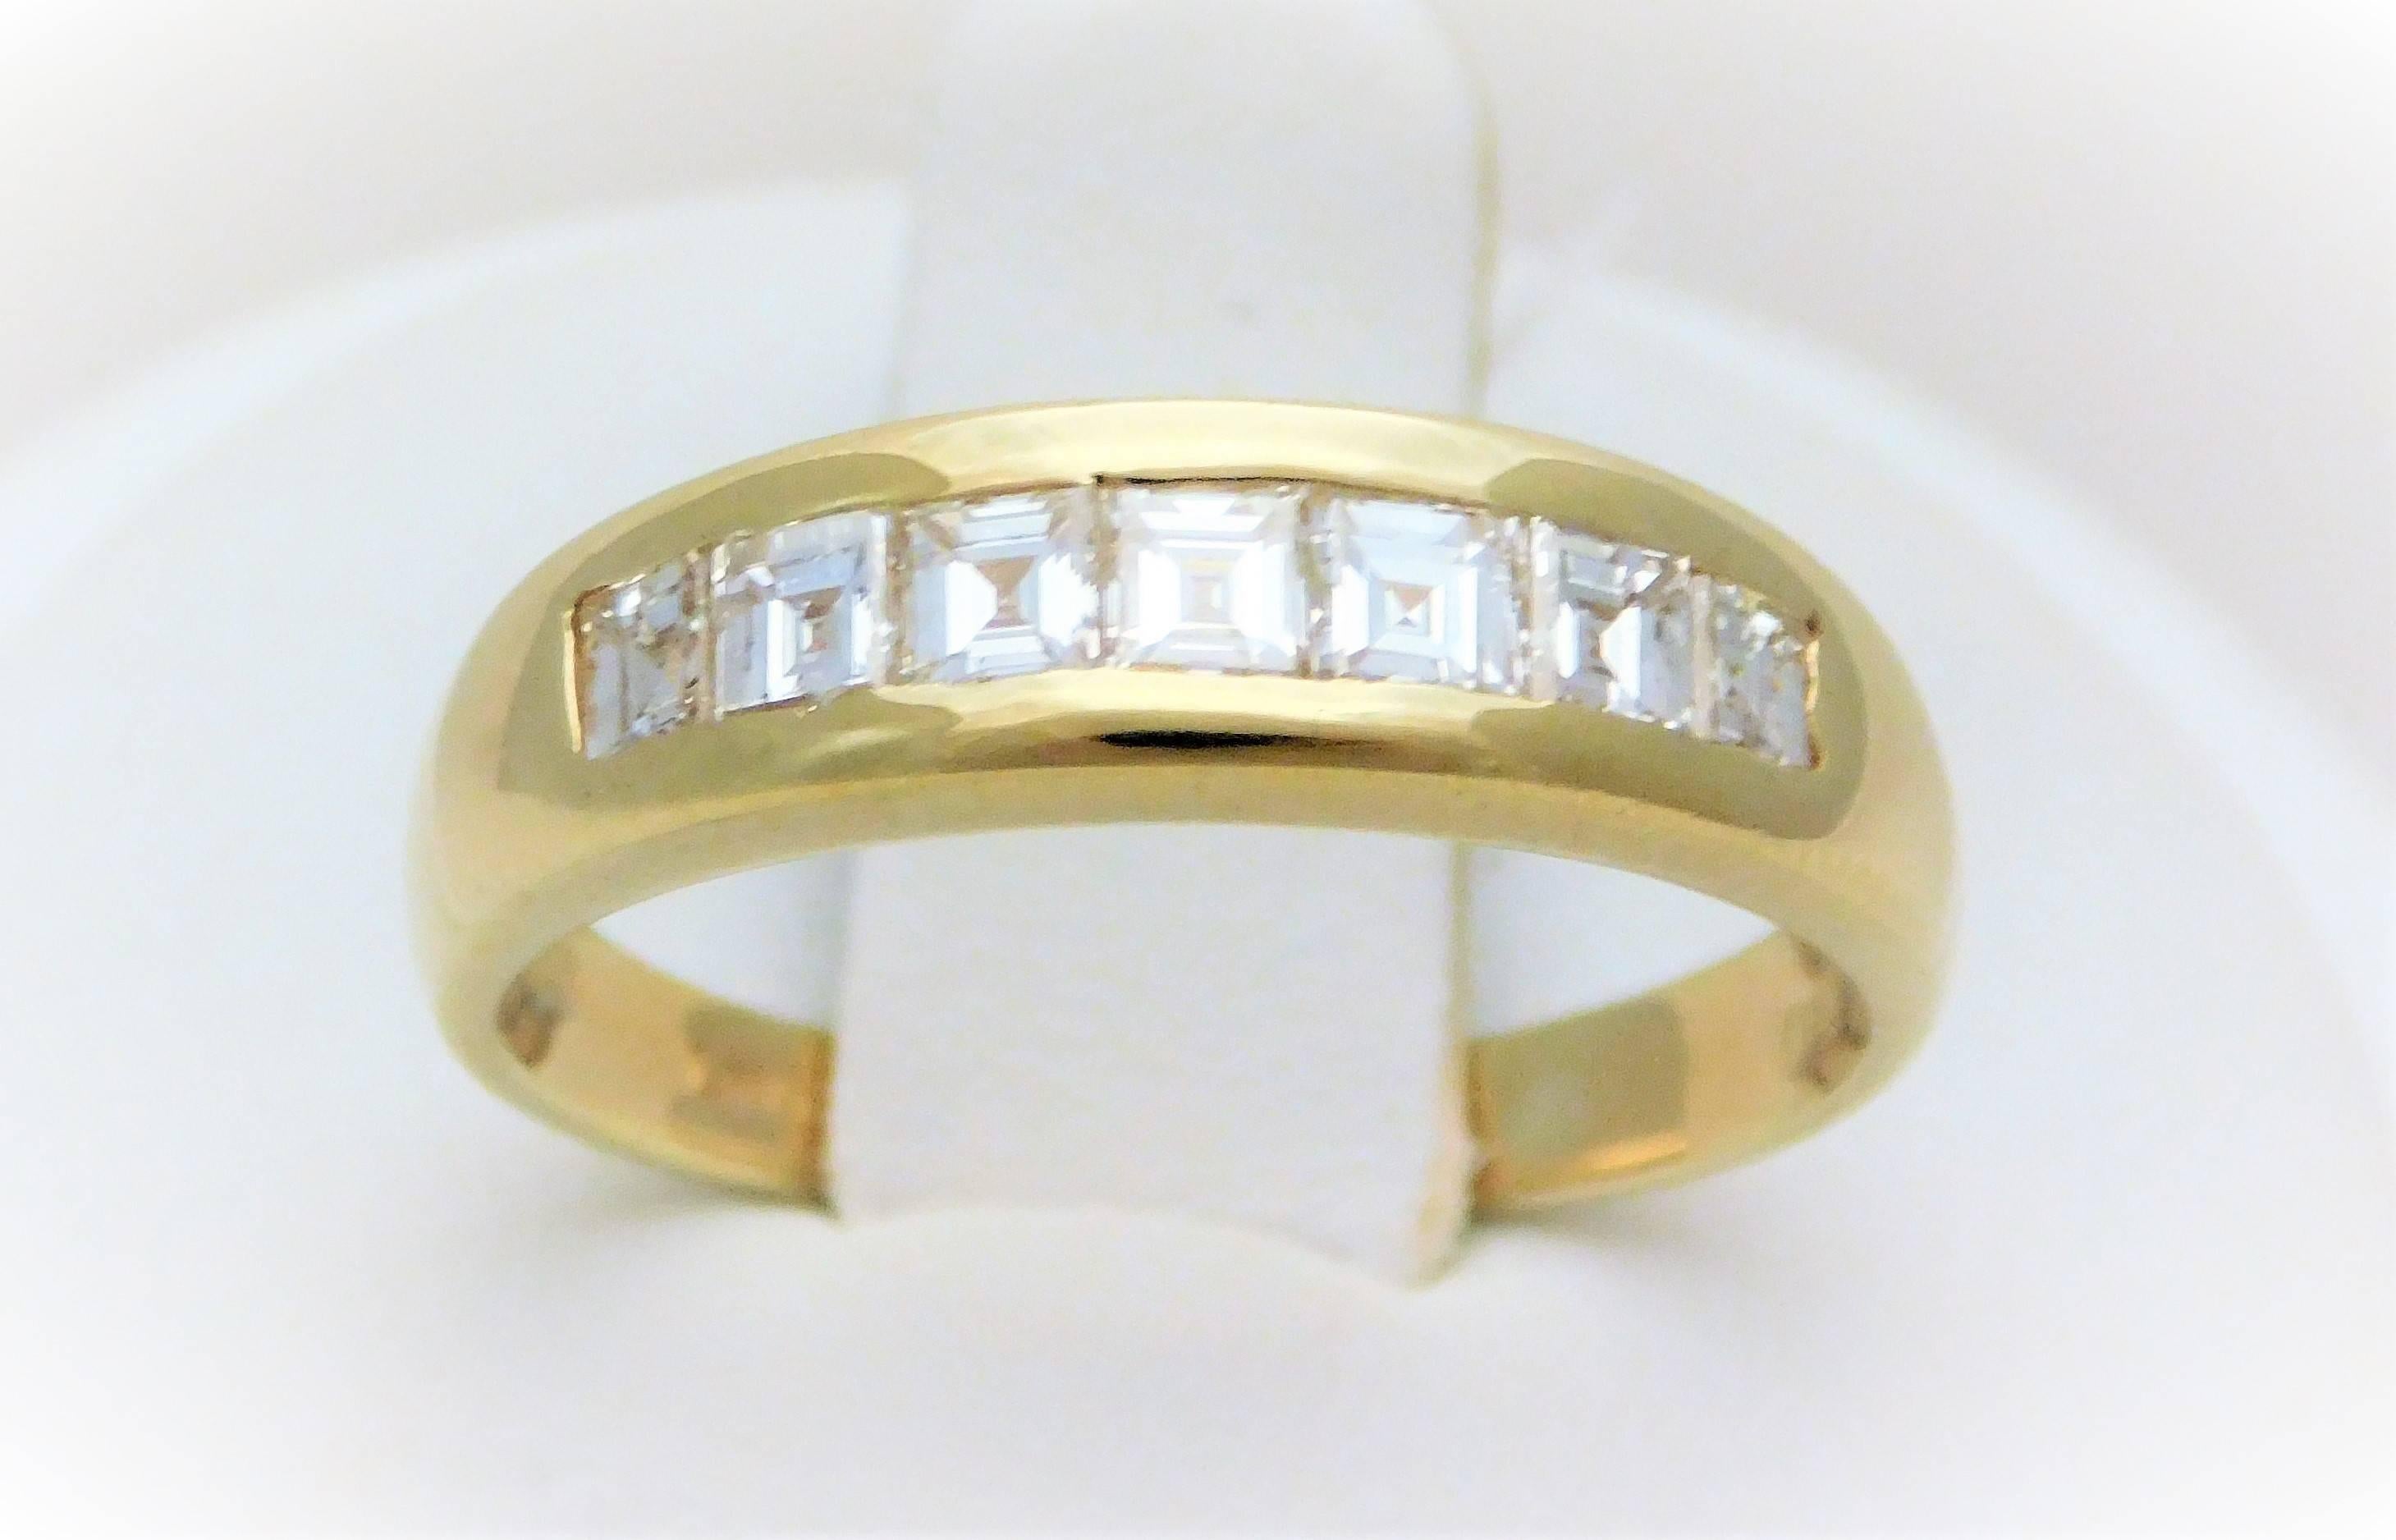 
From a Sothern Gentleman’s estate.  One of the handsomest gent’s bands we’ve ever had.  This modernist-style wedding band has been hand crafted by LANG in solid 18k yellow gold.  It has been masterfully set with 7 incredibly luminous Asscher-cut